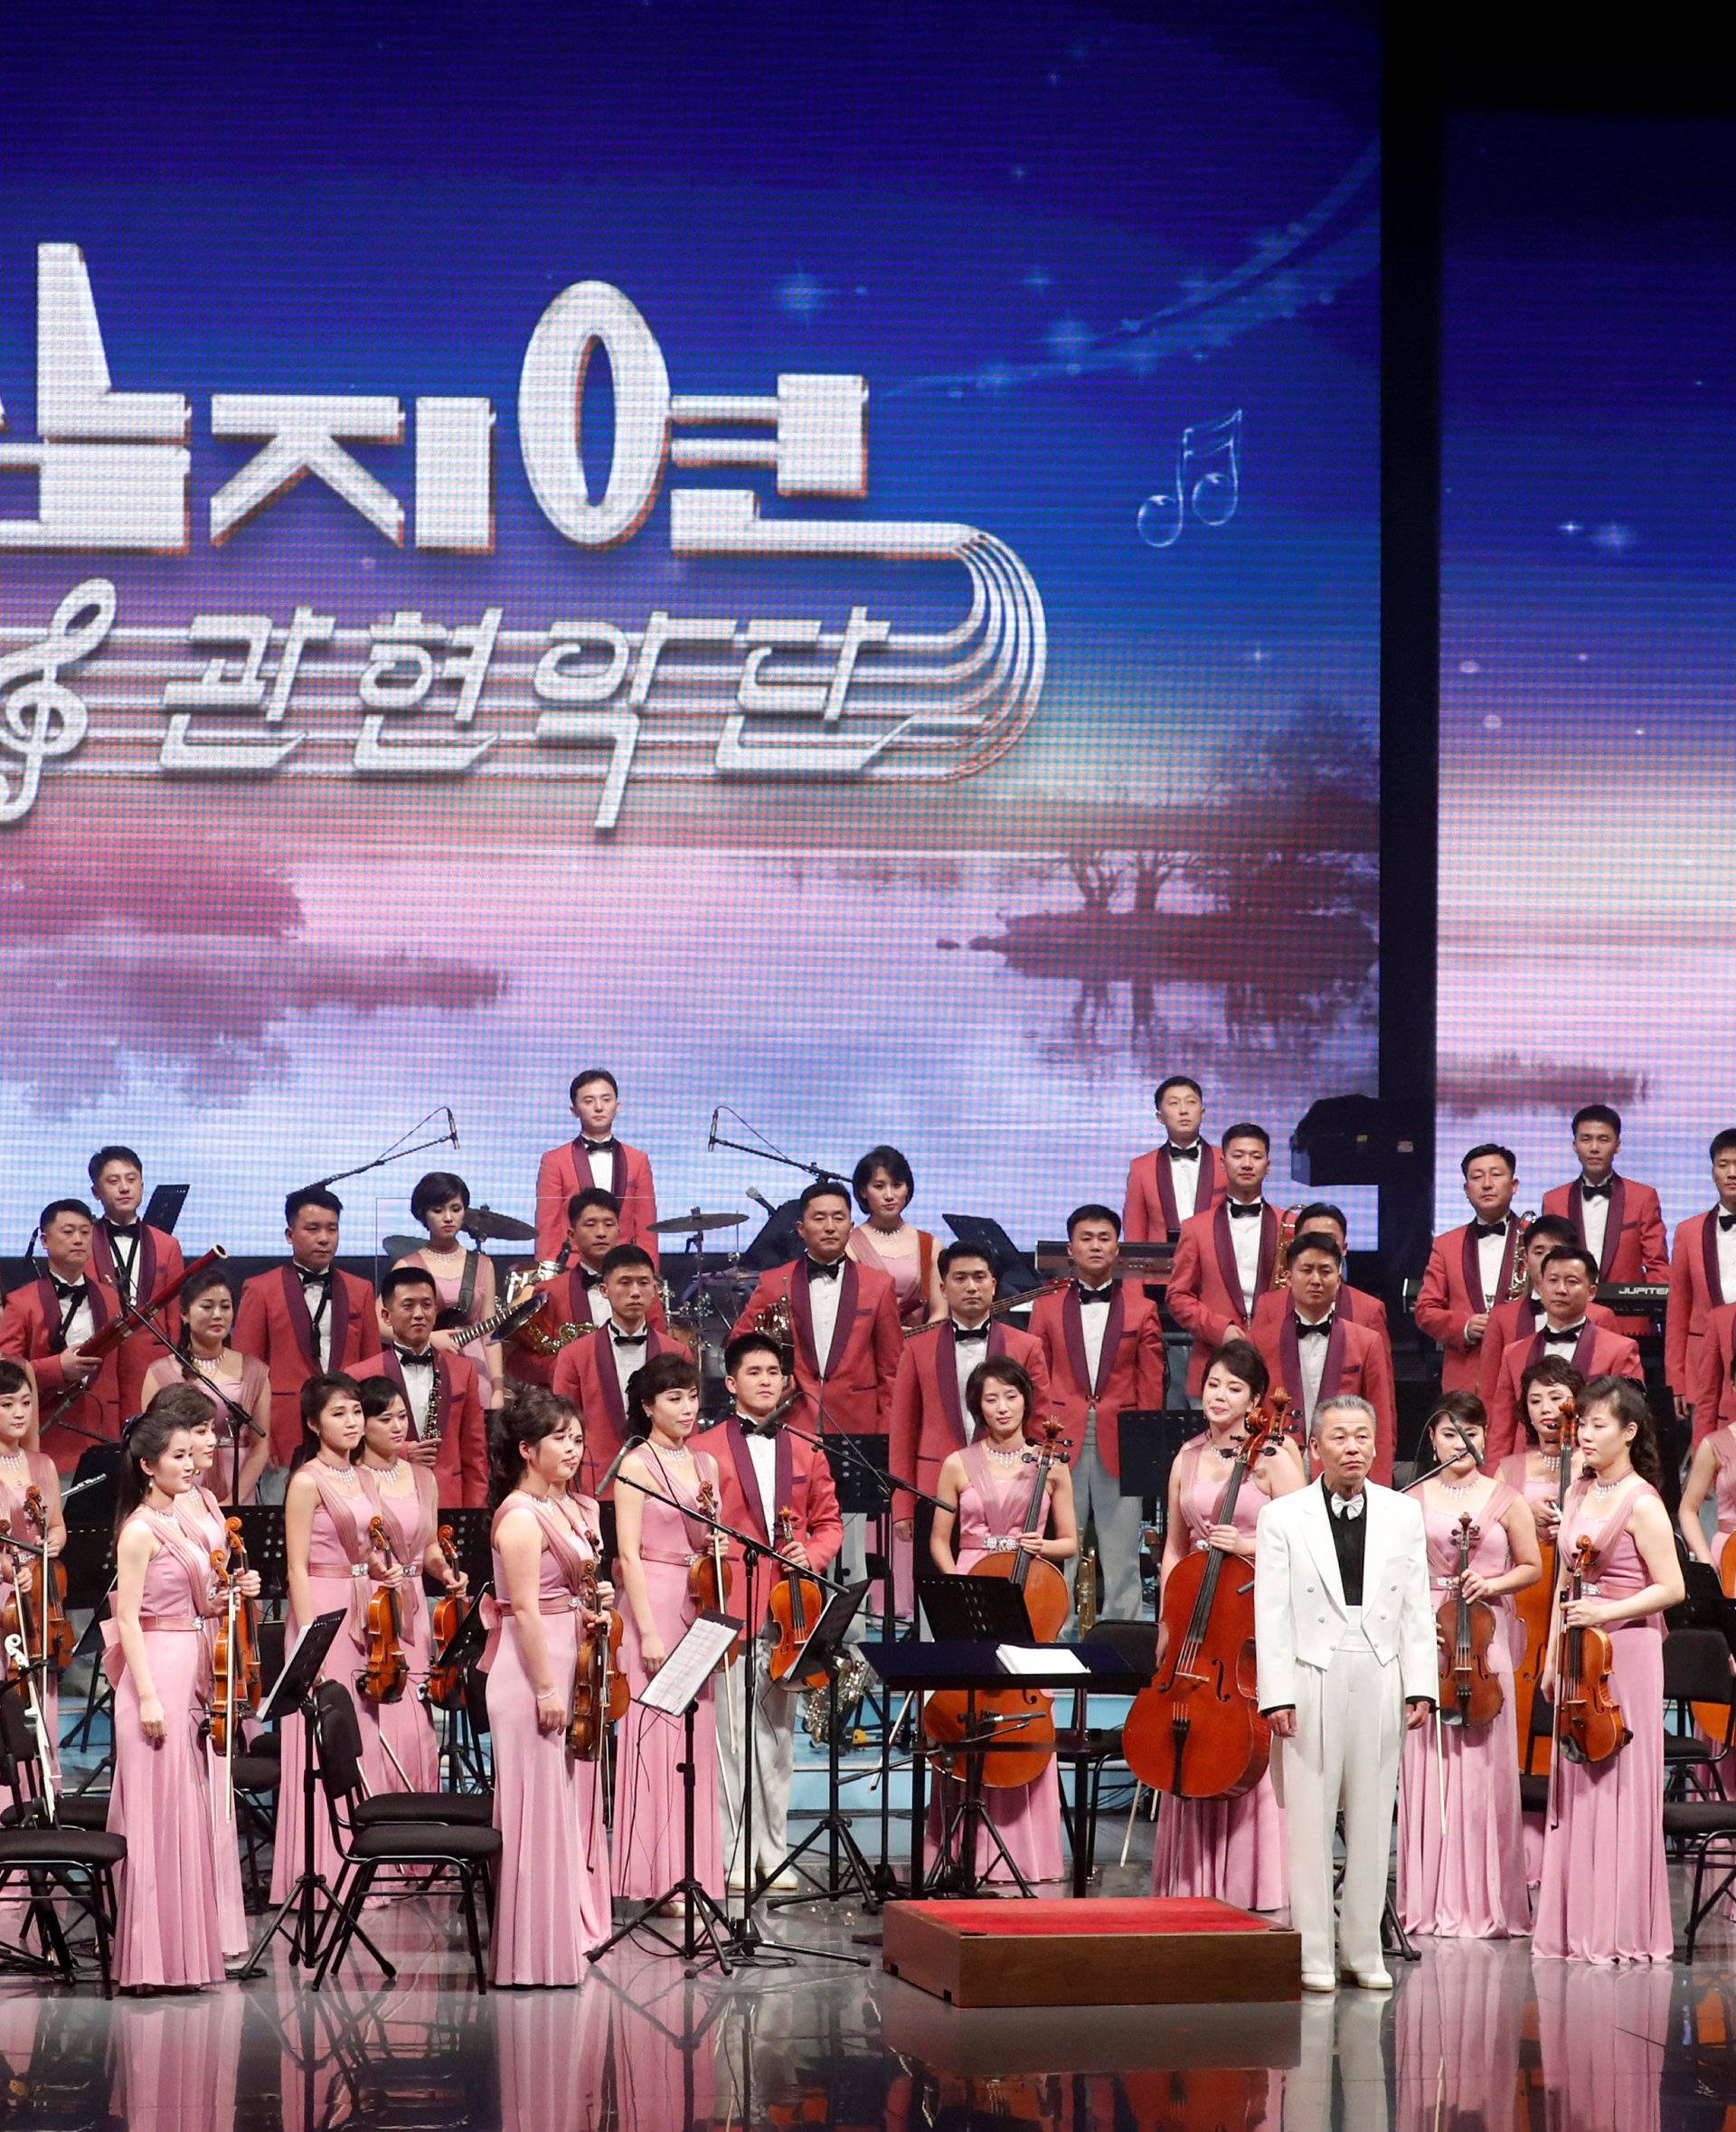 The North Korea's Samjiyon Orchestra performs in Gangneung